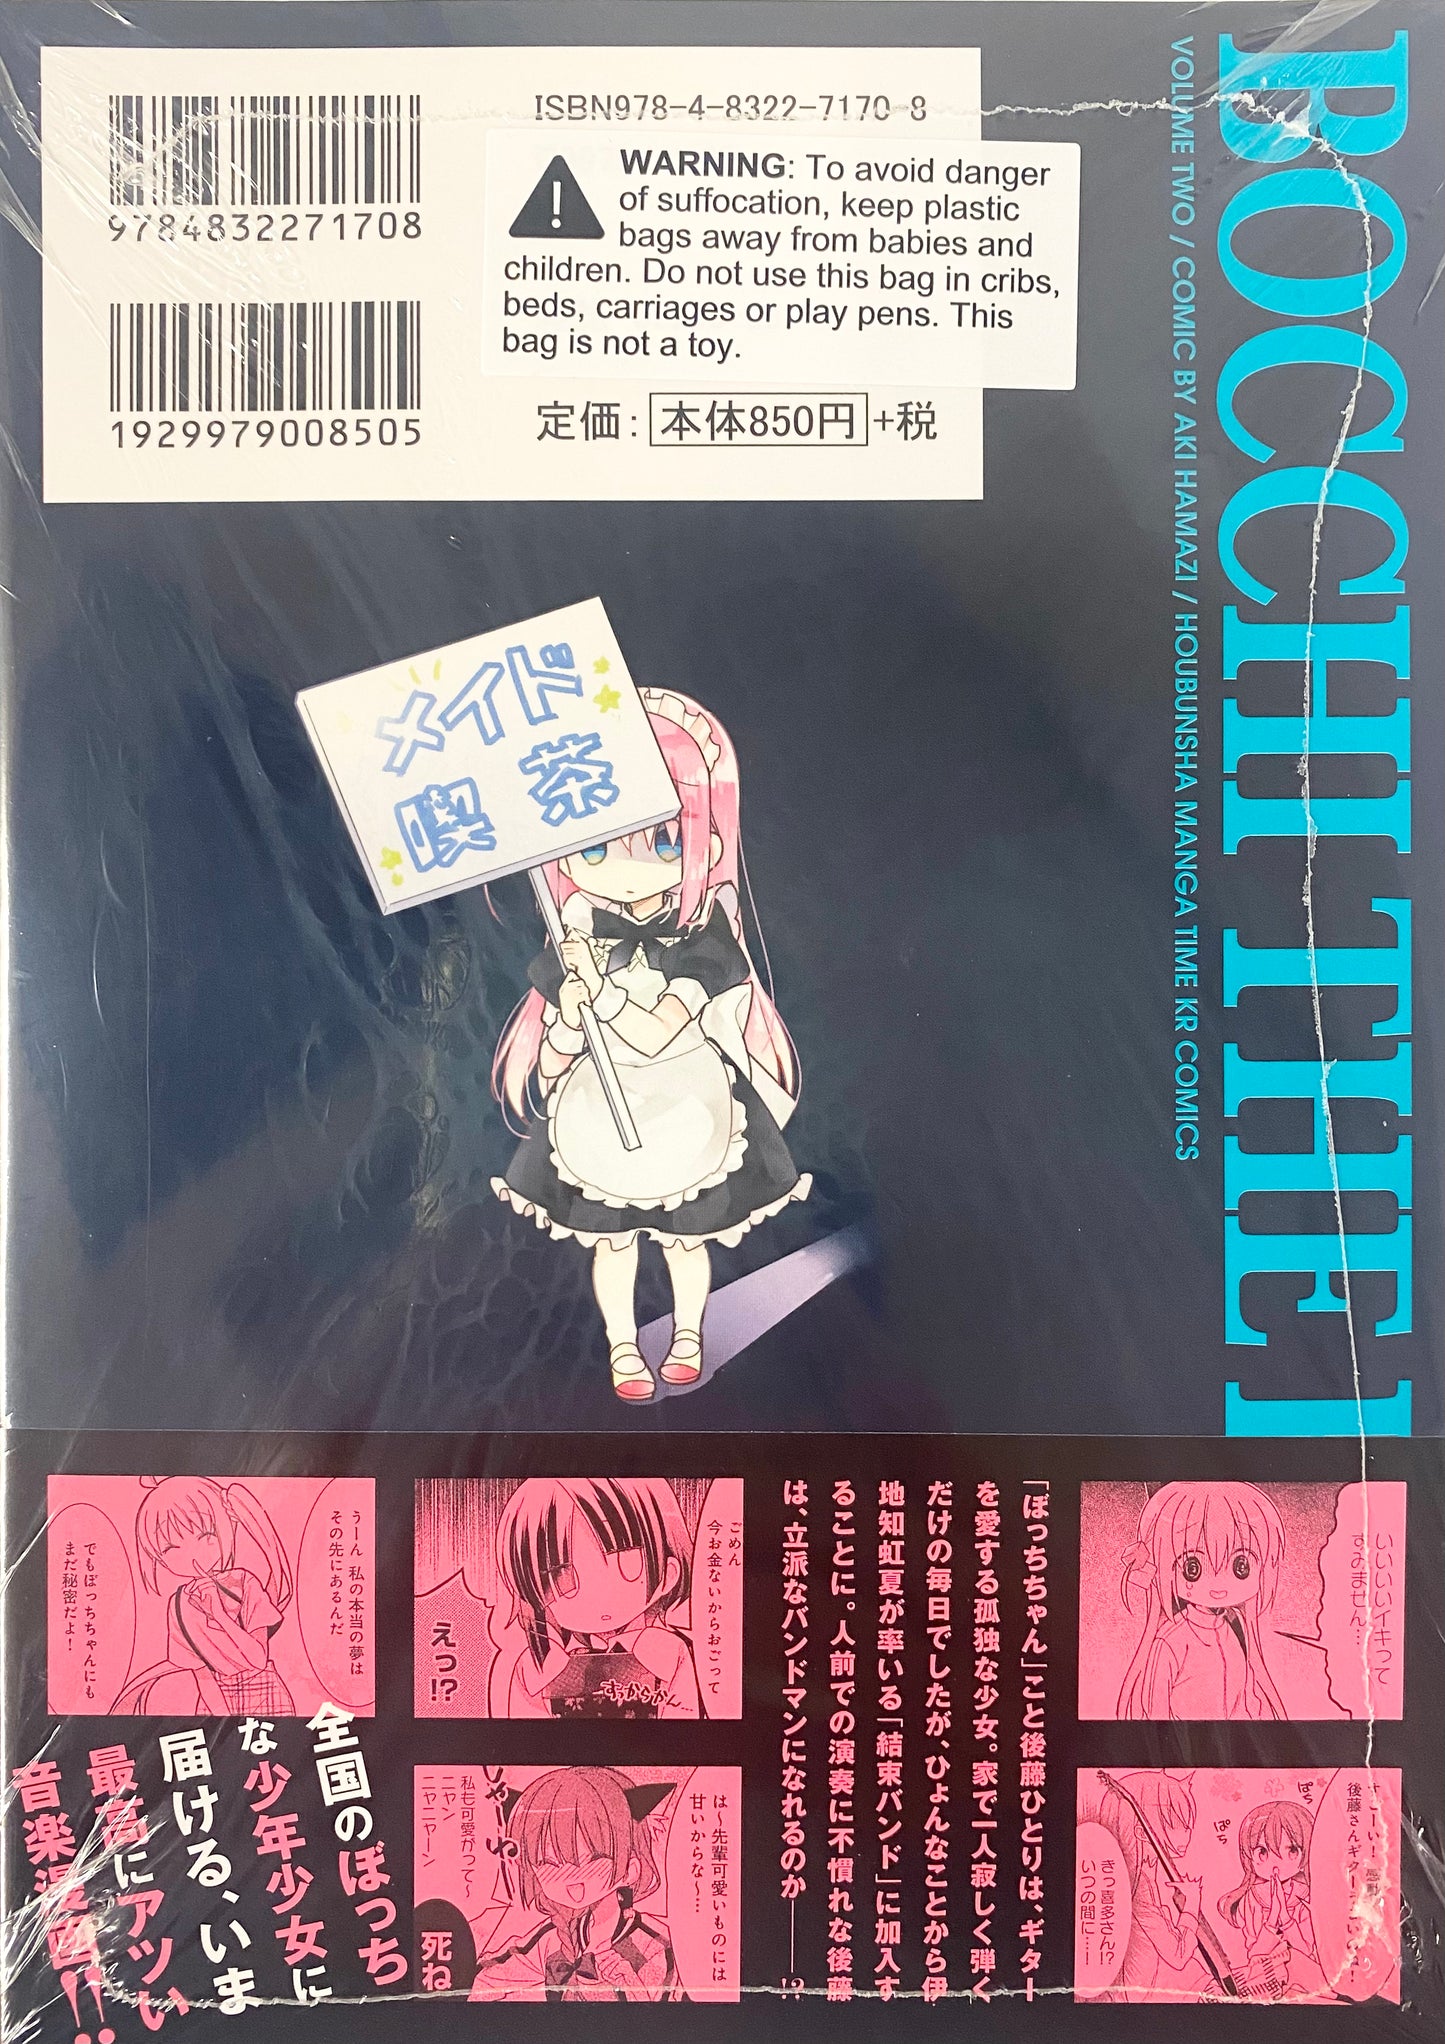 BocchiTheRock Vol.2-Official Japanese Edition